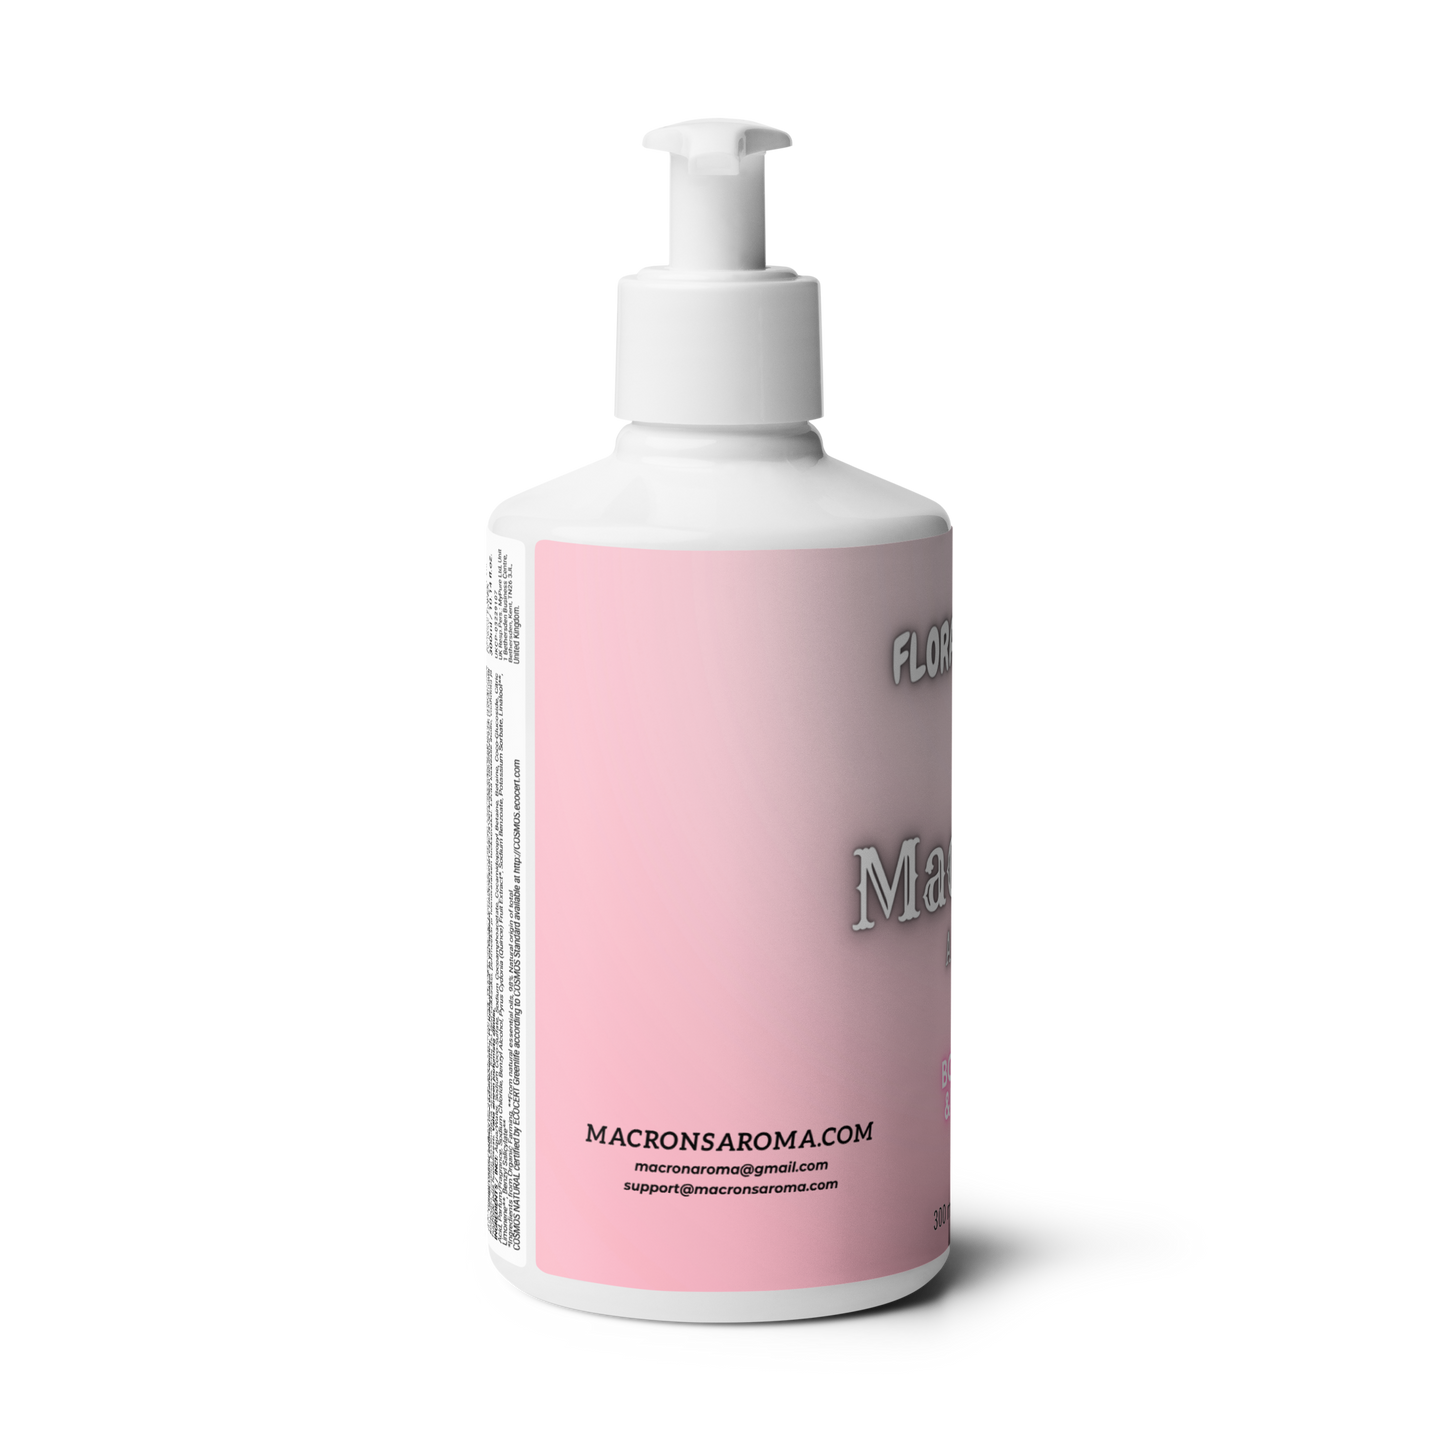 Macron's Aroma (Floral hand & body wash)